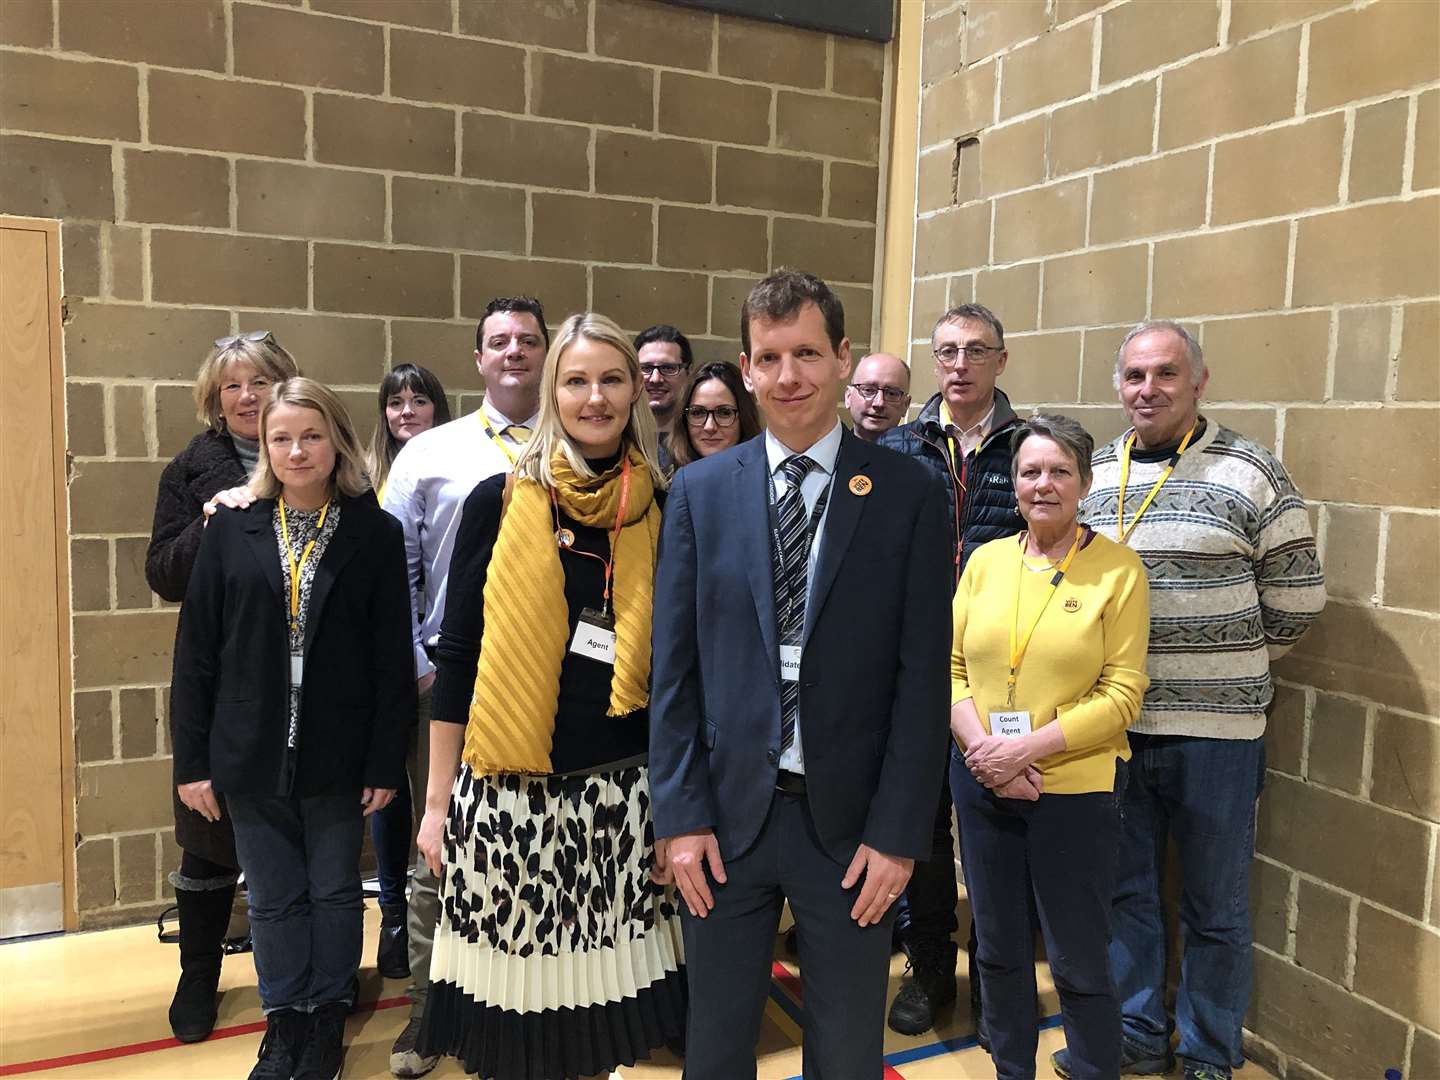 Ben Chapelard with his supporters at the Tunbridge Wells count